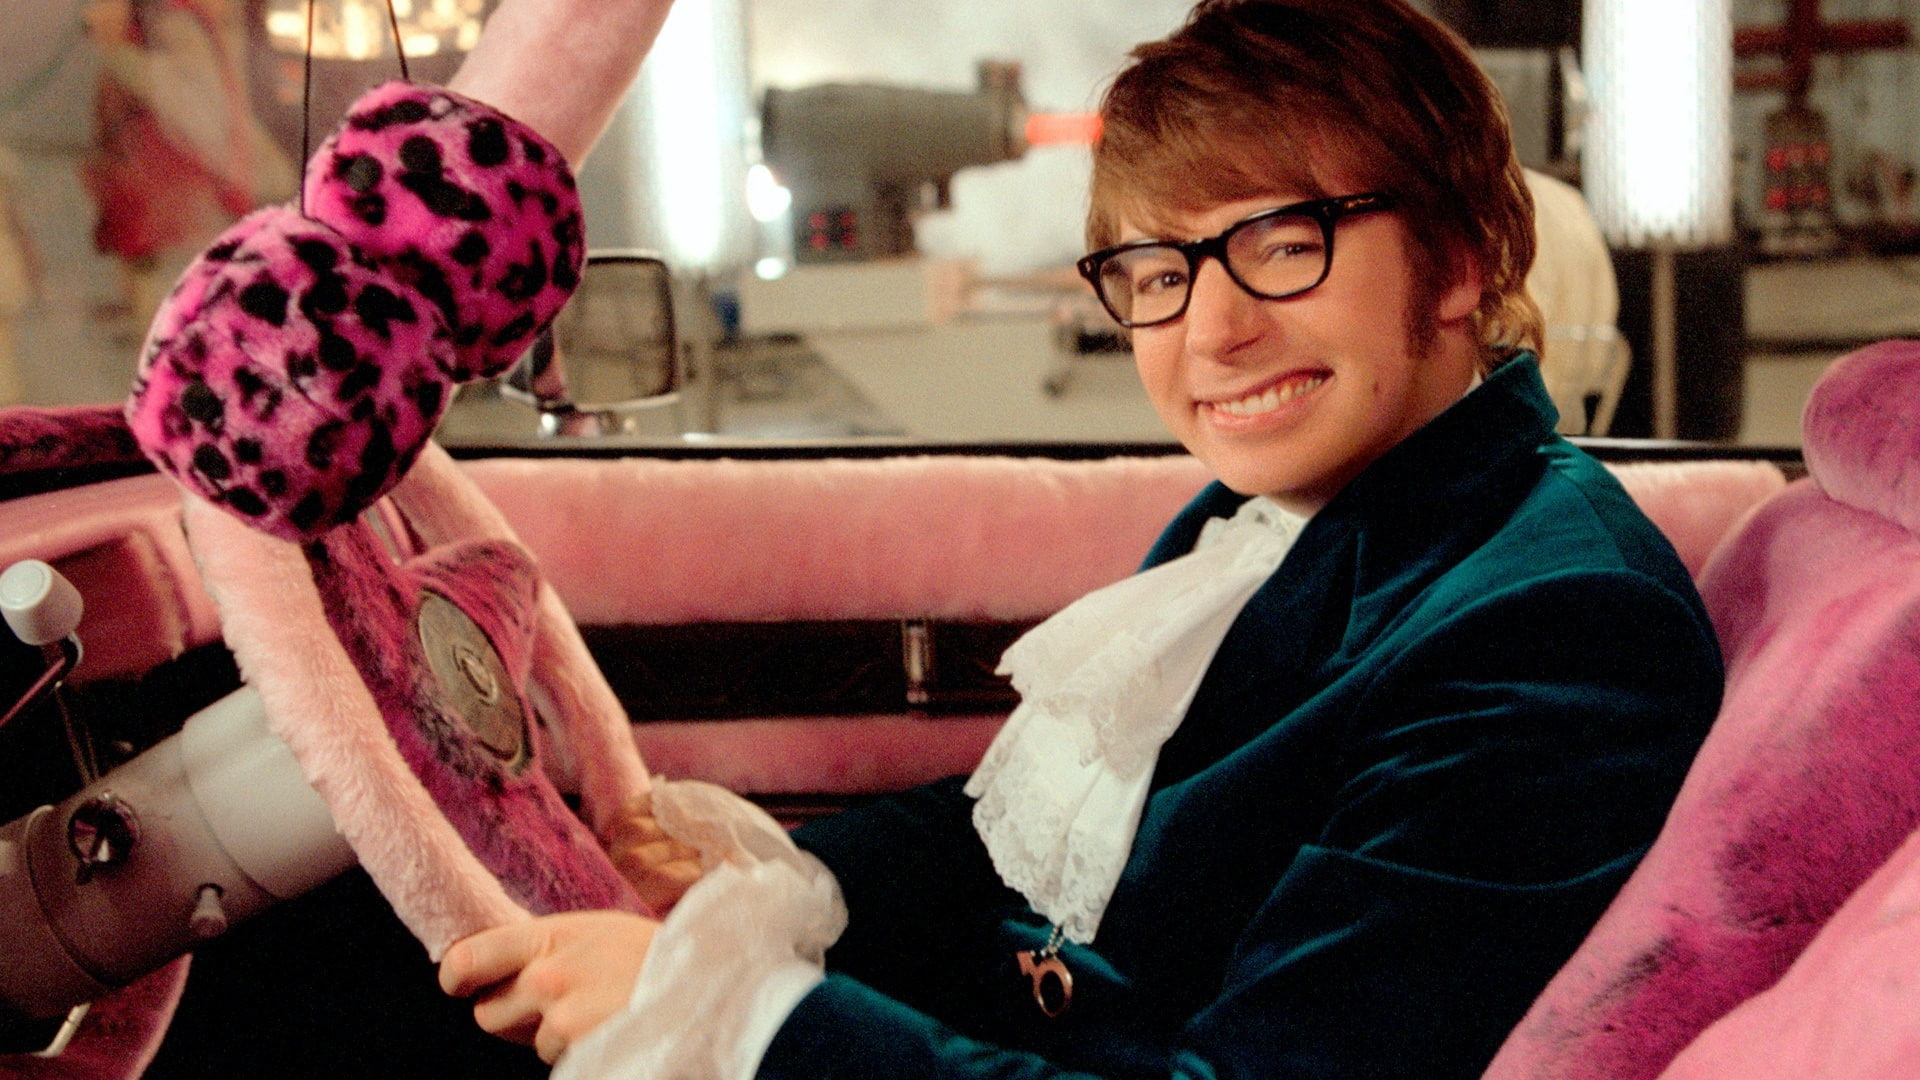 Austin Powers, Mike Myers, movies